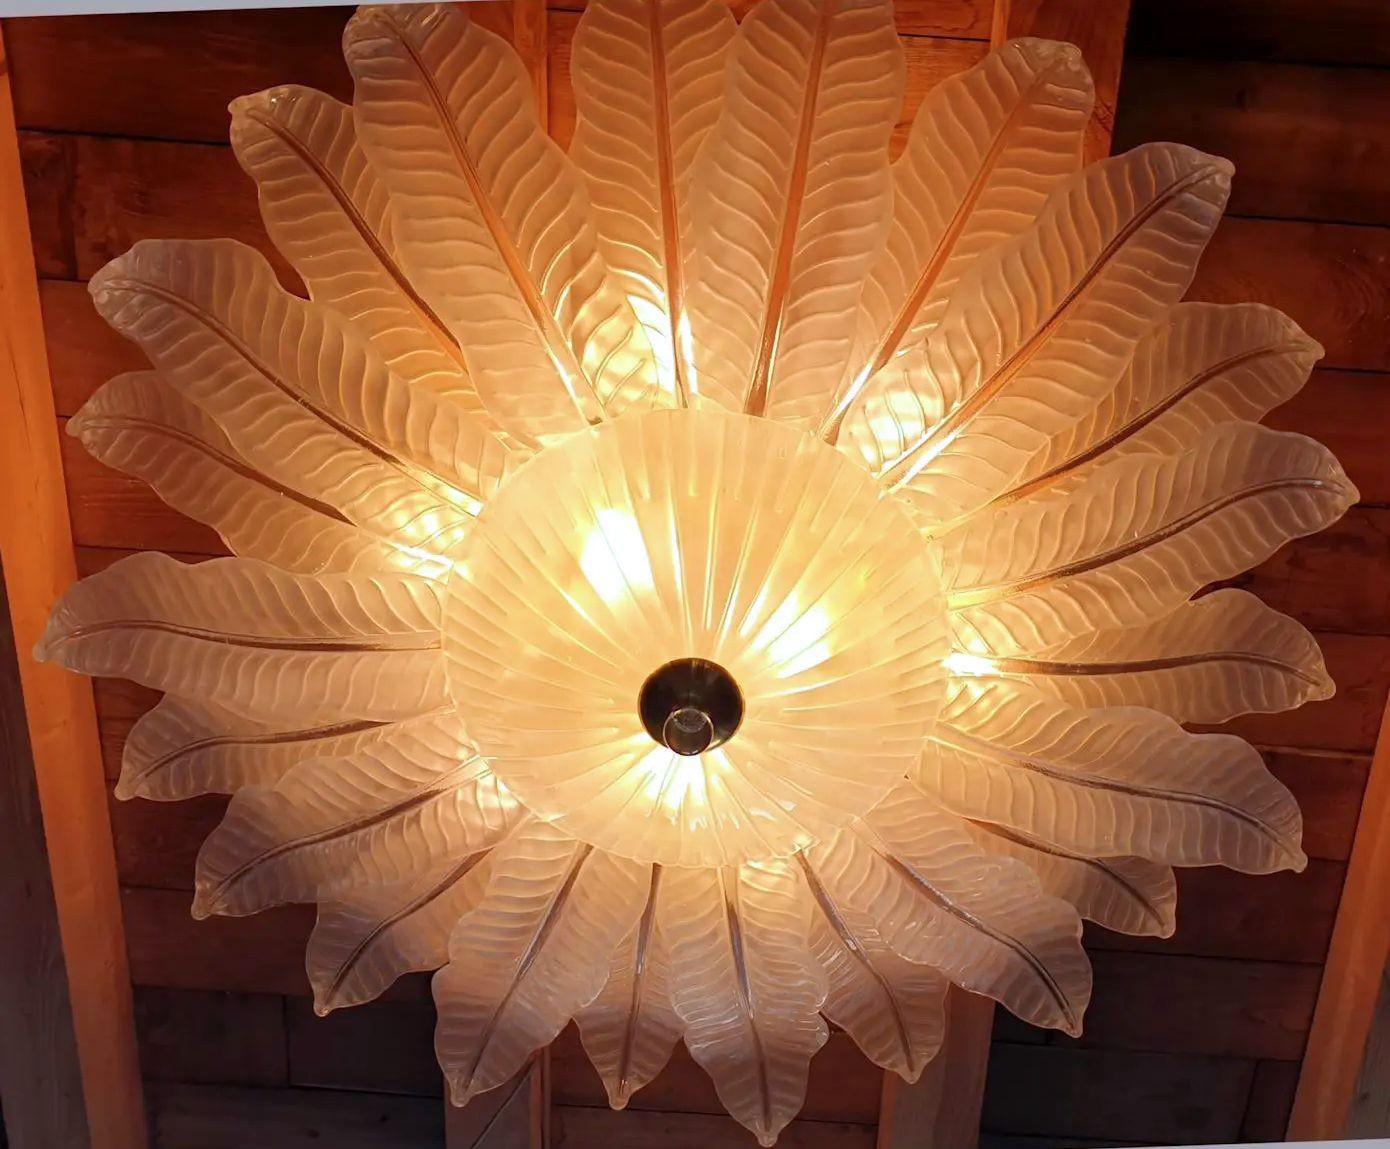 Extra large Leaf Murano glass Mid Century Modern flush-mount chandelier, by Barovier and Toso, Italy 1970s.
The Vintage Chandelier is made of large frosted Murano glass leaves and a center bowl, on a gold plated frame.
The glass is translucent,